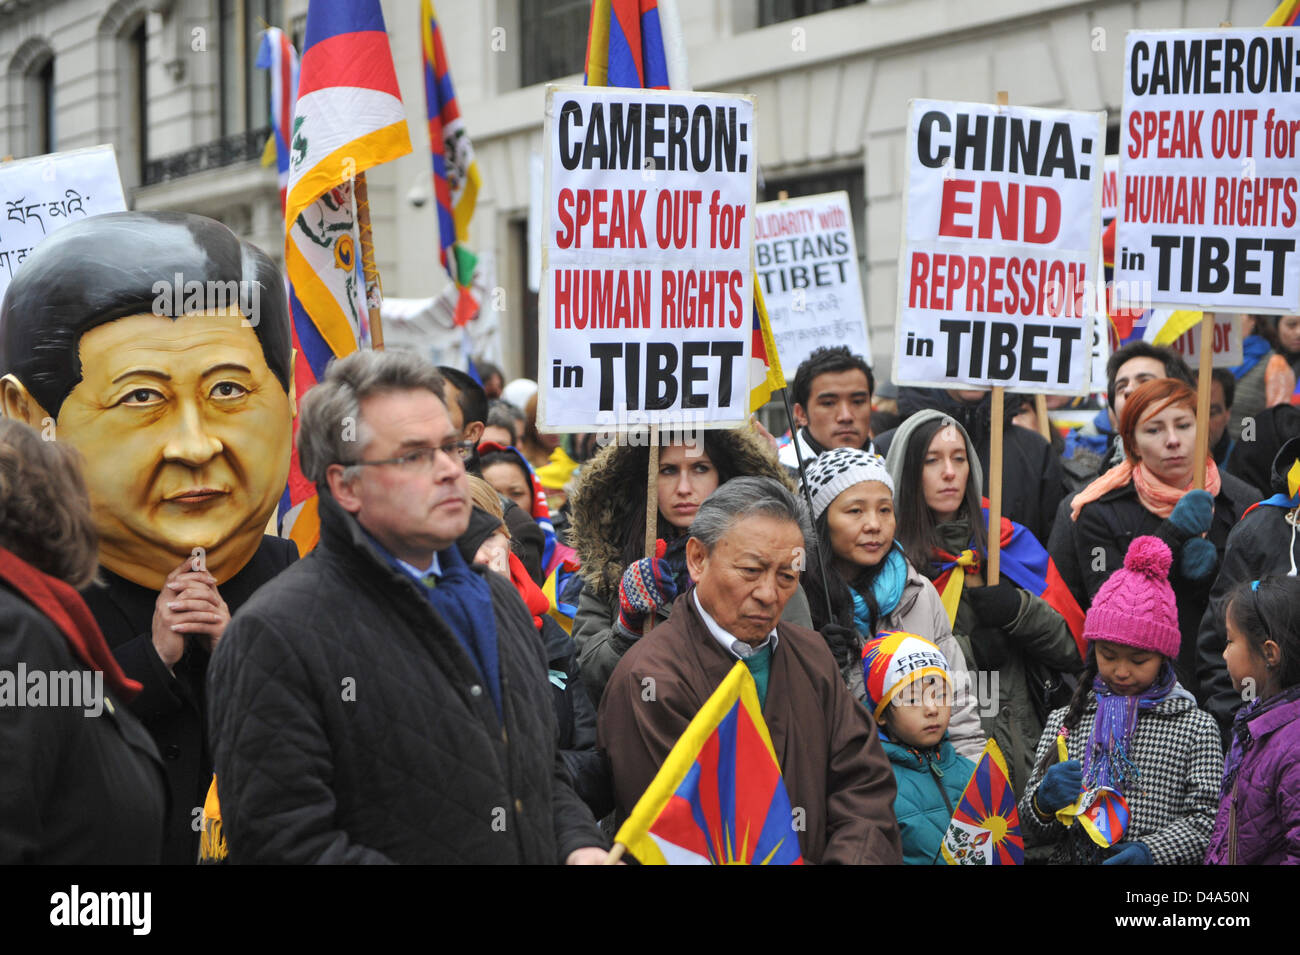 Portland Place, London, UK. 10th March 2013. A man wearing a mask of the new leader of the Chinese Communist party, Xi Jinping at the rally at the Chinese Embassy. Tibetan people march through central London in protest against the Chinese involvement in Tibet, ending in a rally outside the Chinese Embassy on Portland Place, Stock Photo